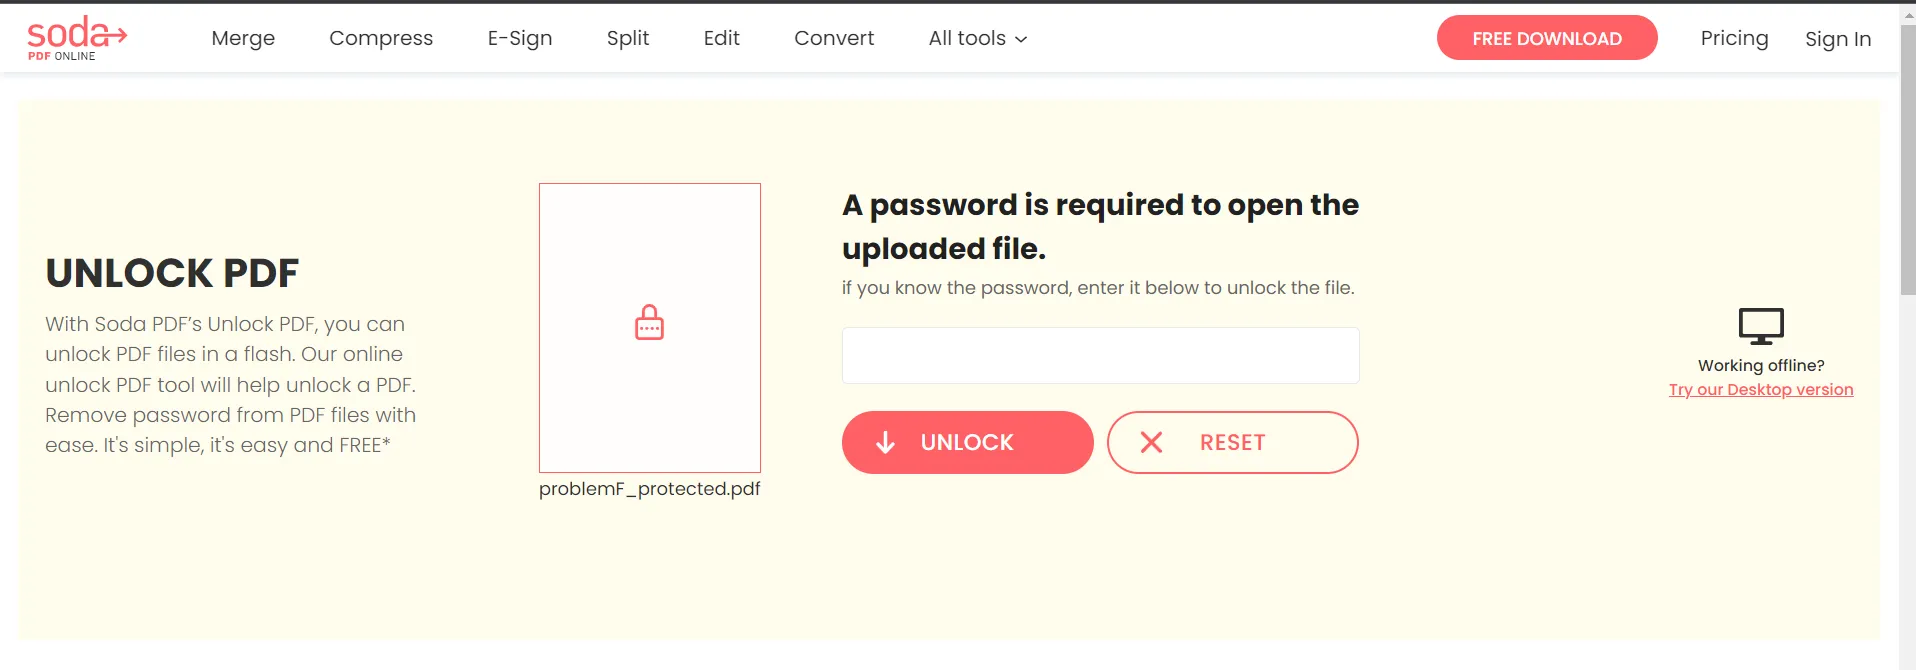 How to Remove a Password from a PDF File, Figure 13: Unlock